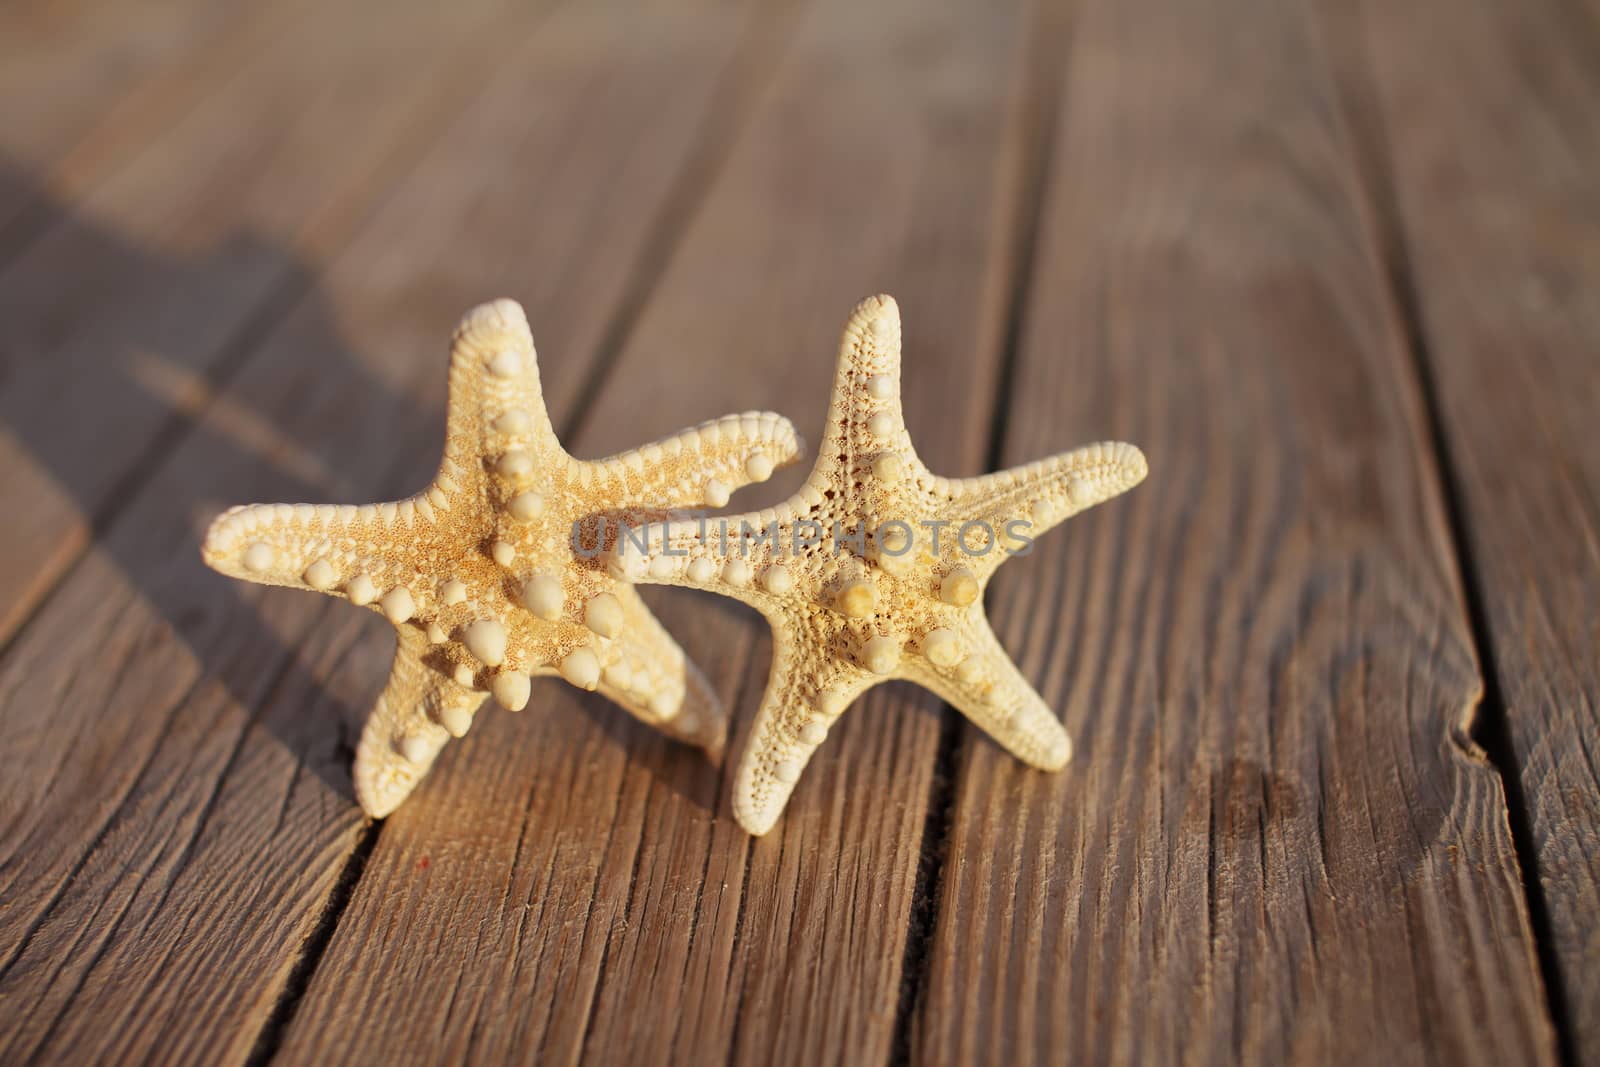 Starfish on a wooden pier poured over a wooden deck. Summer vacation concept. Holidays by the sea by selinsmo